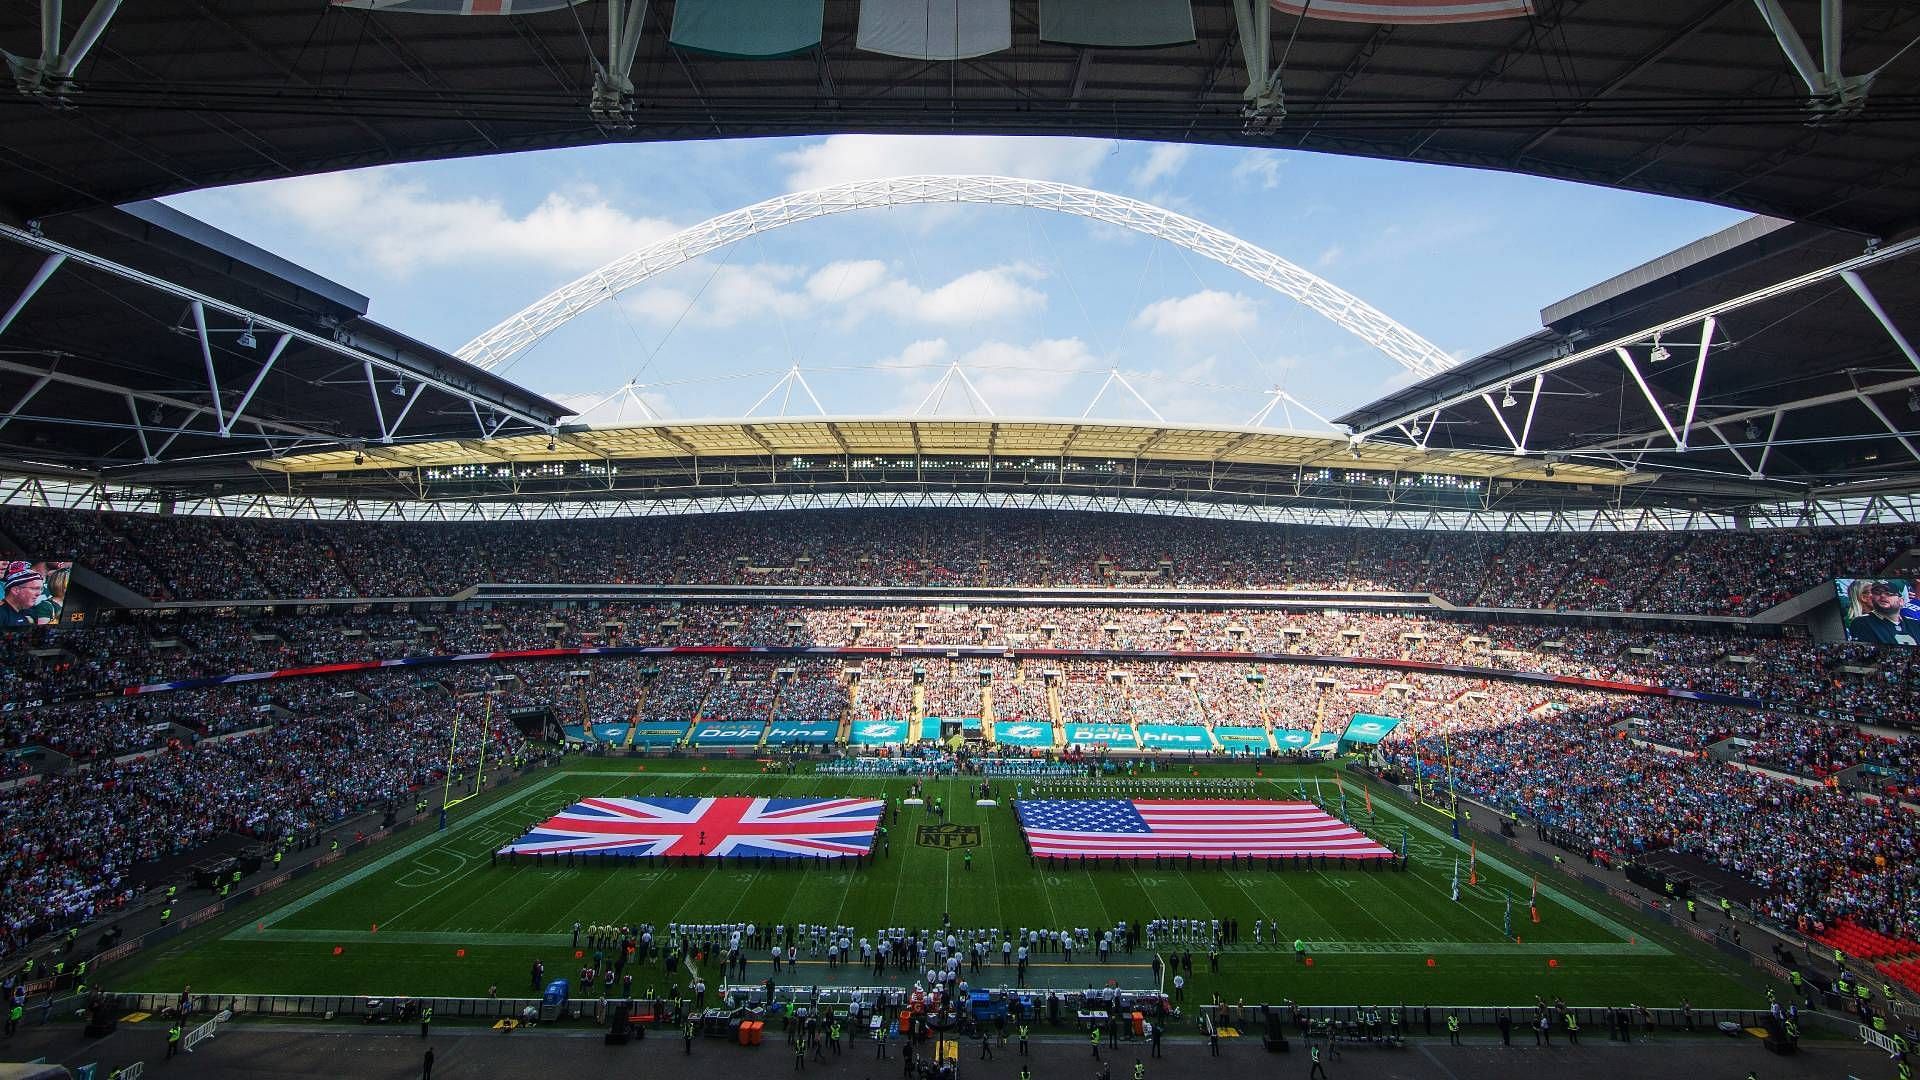 Will we see an NFL team in the UK? (Image: DAZN)